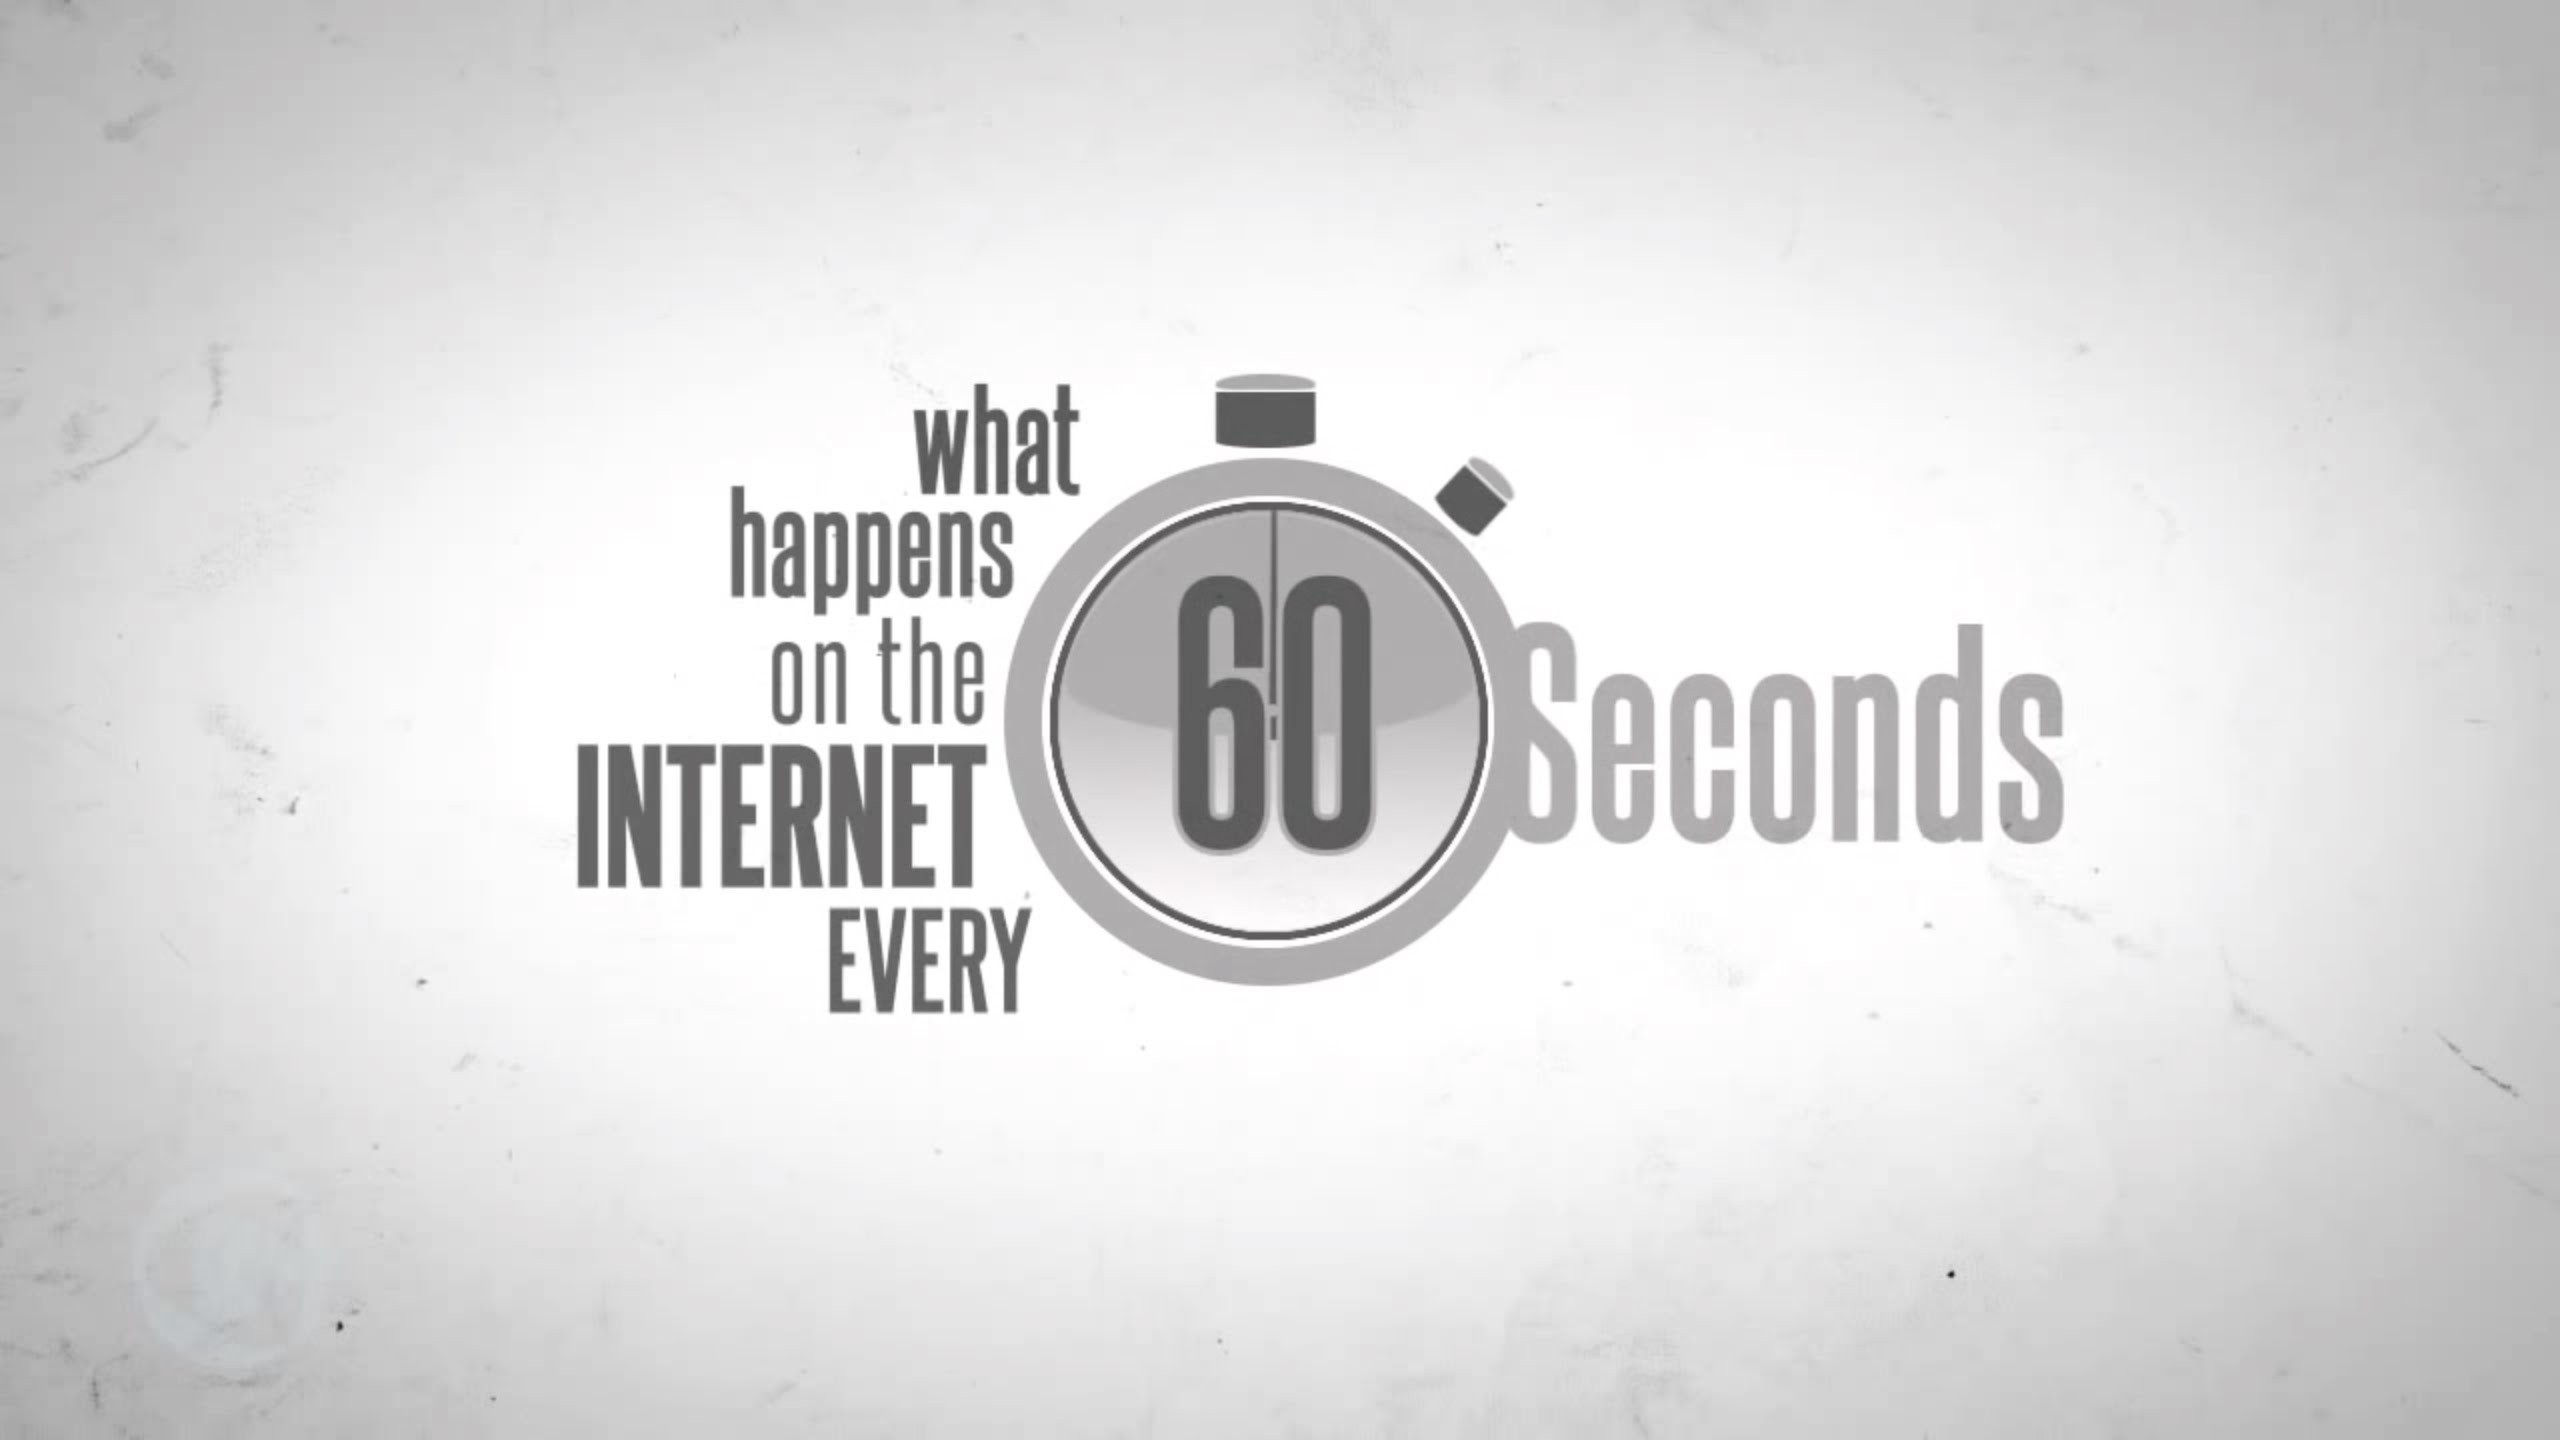 Second happened. Internet in 60 seconds. Happens. Happens on. Youtube 1 seconds ago.